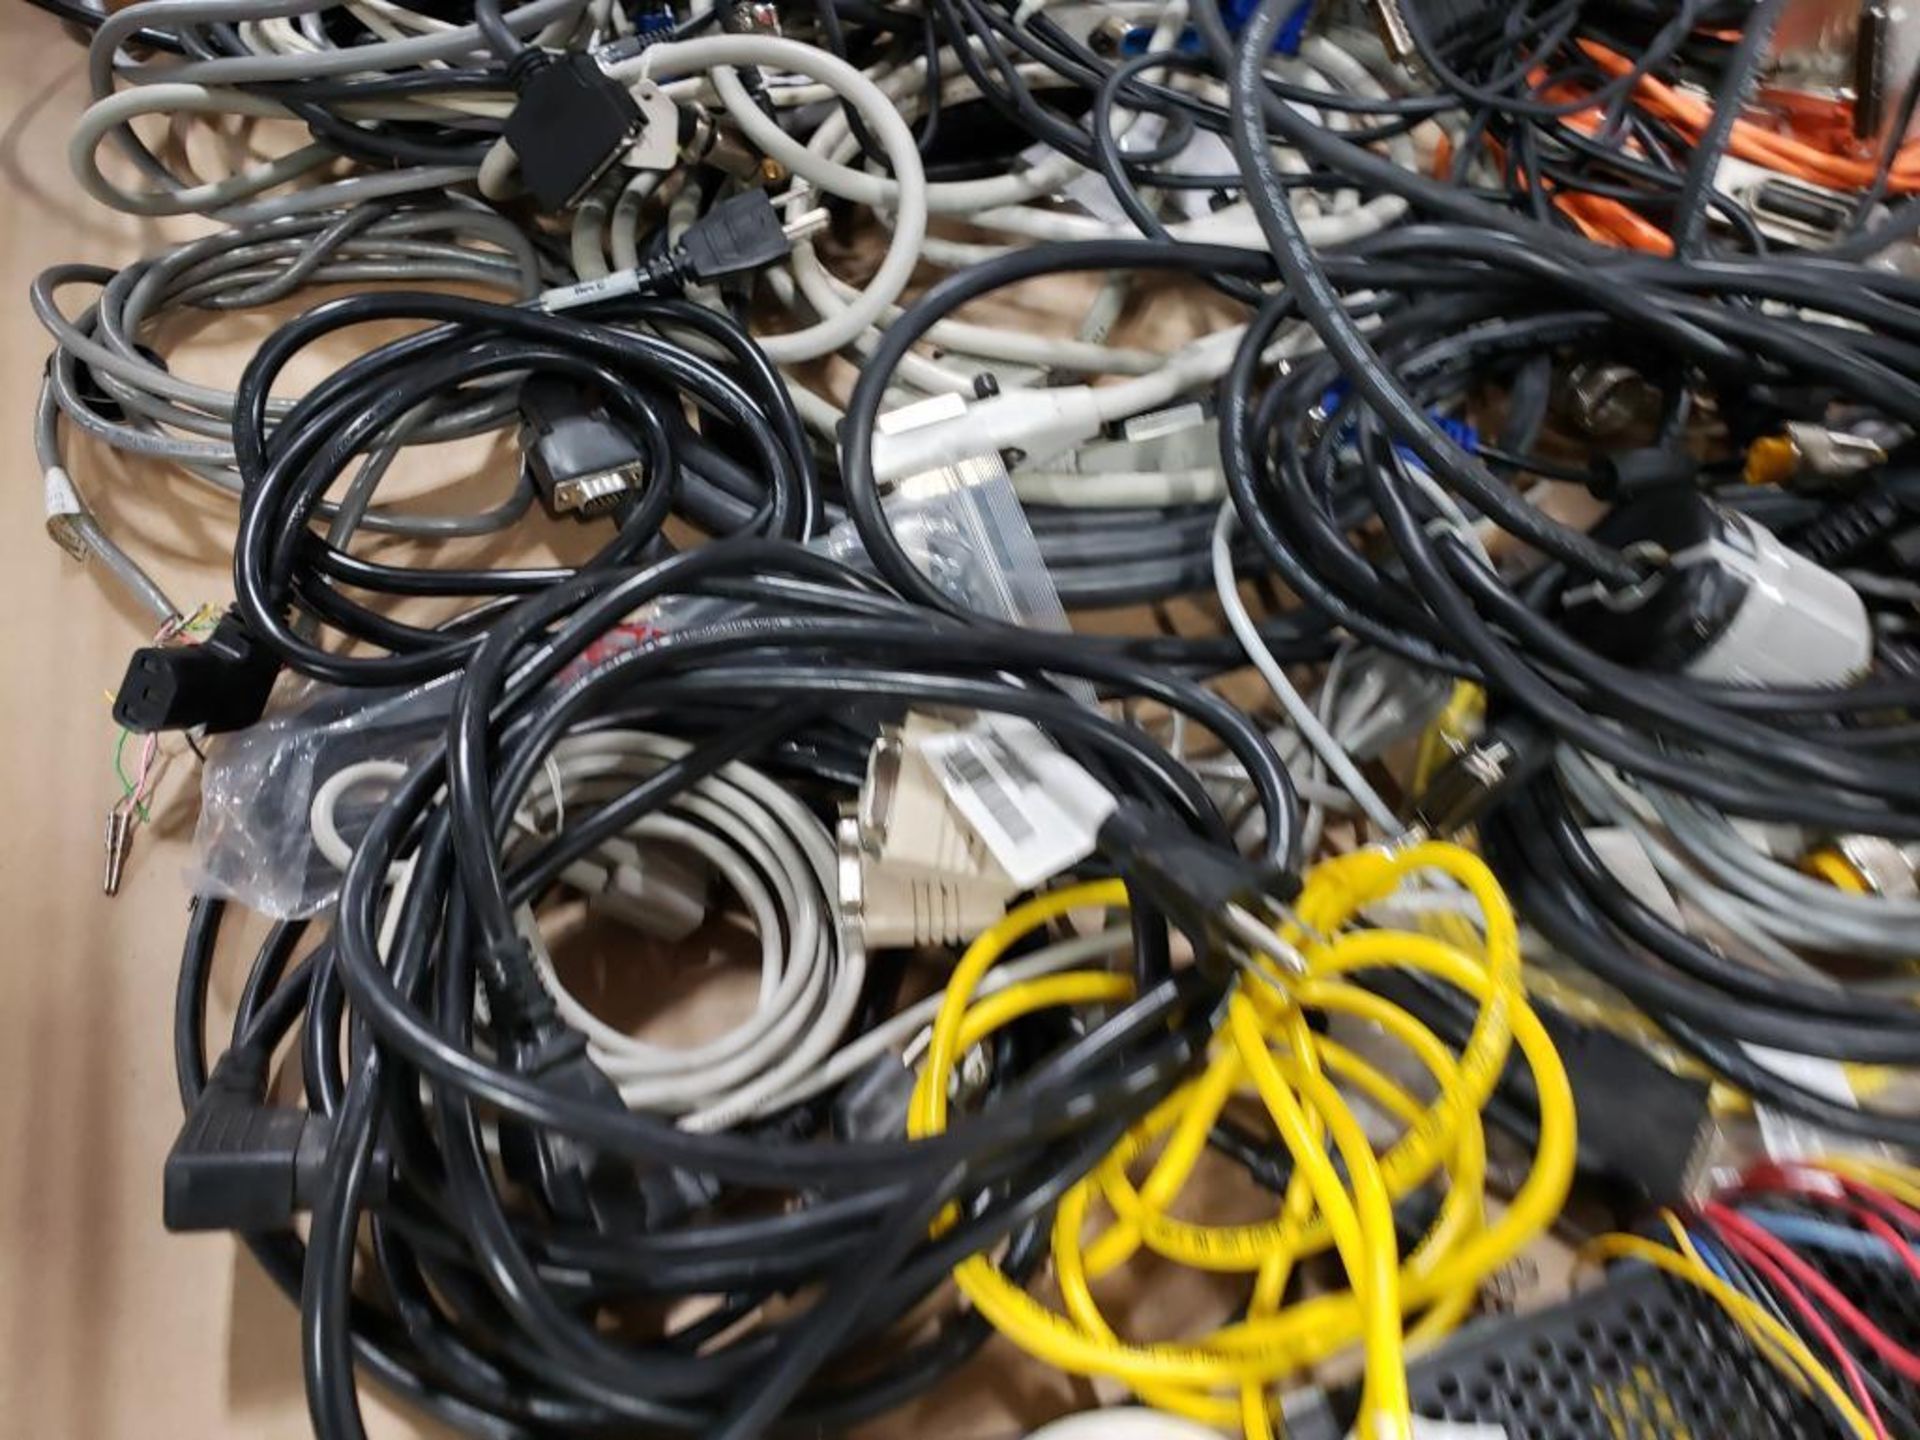 Large assortment of power and connection cordsets. - Image 3 of 10